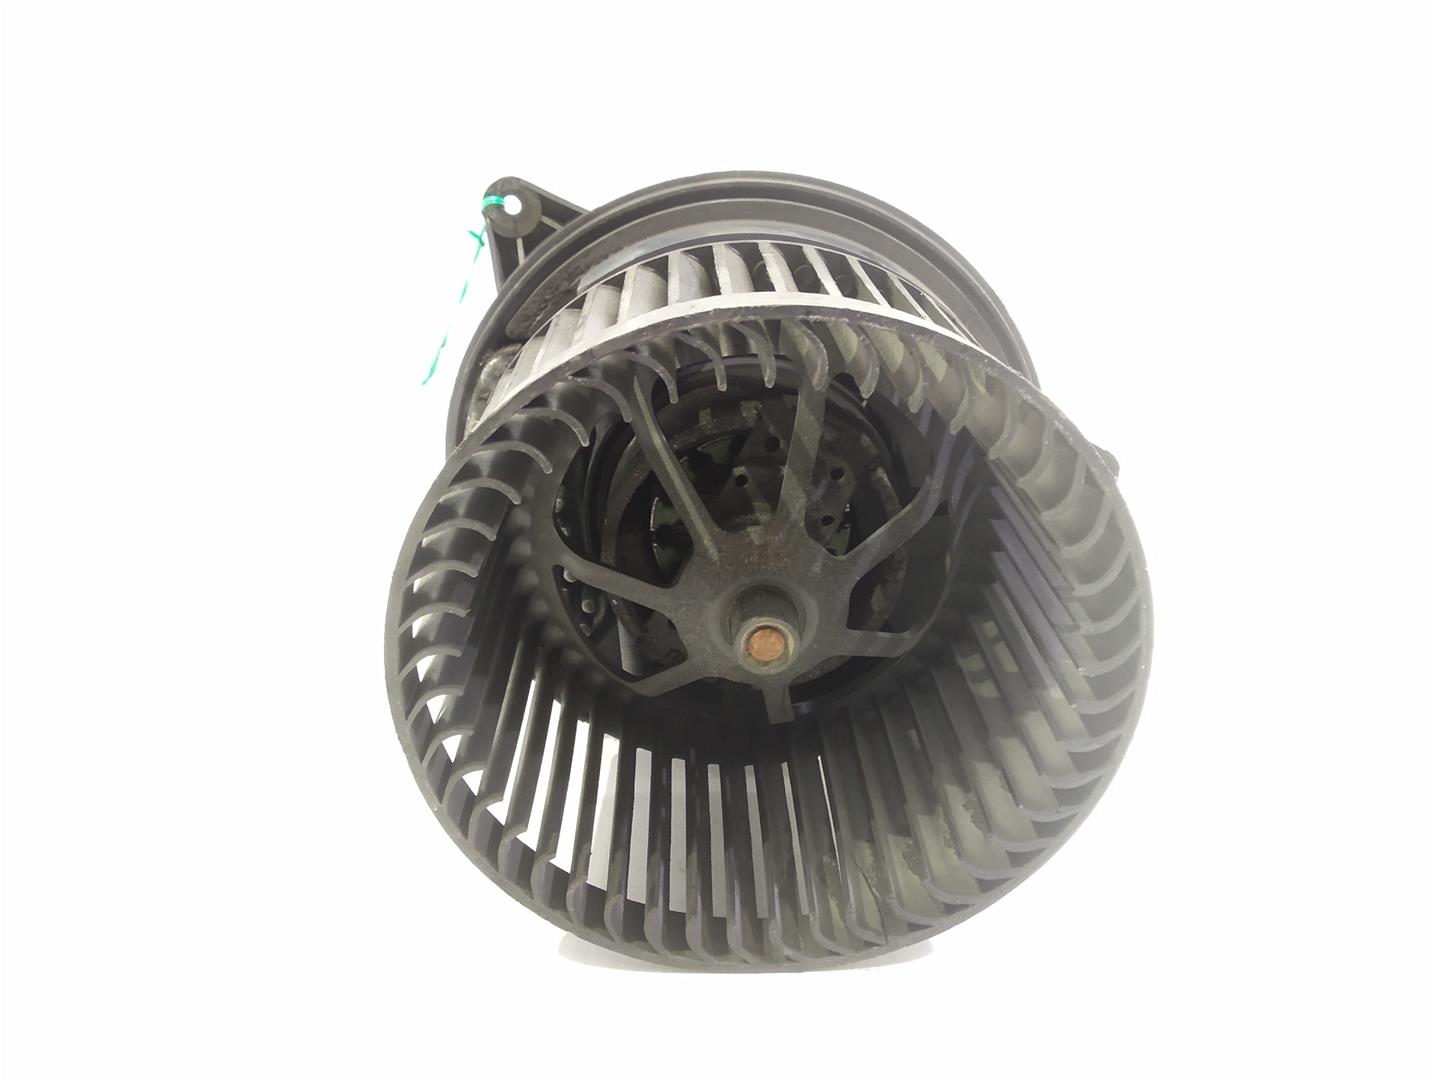 FORD Mondeo 3 generation (2000-2007) Heater Blower Fan 3S7H19E624AB, 3S7H19E624AB, 3S7H19E624AB 24604891